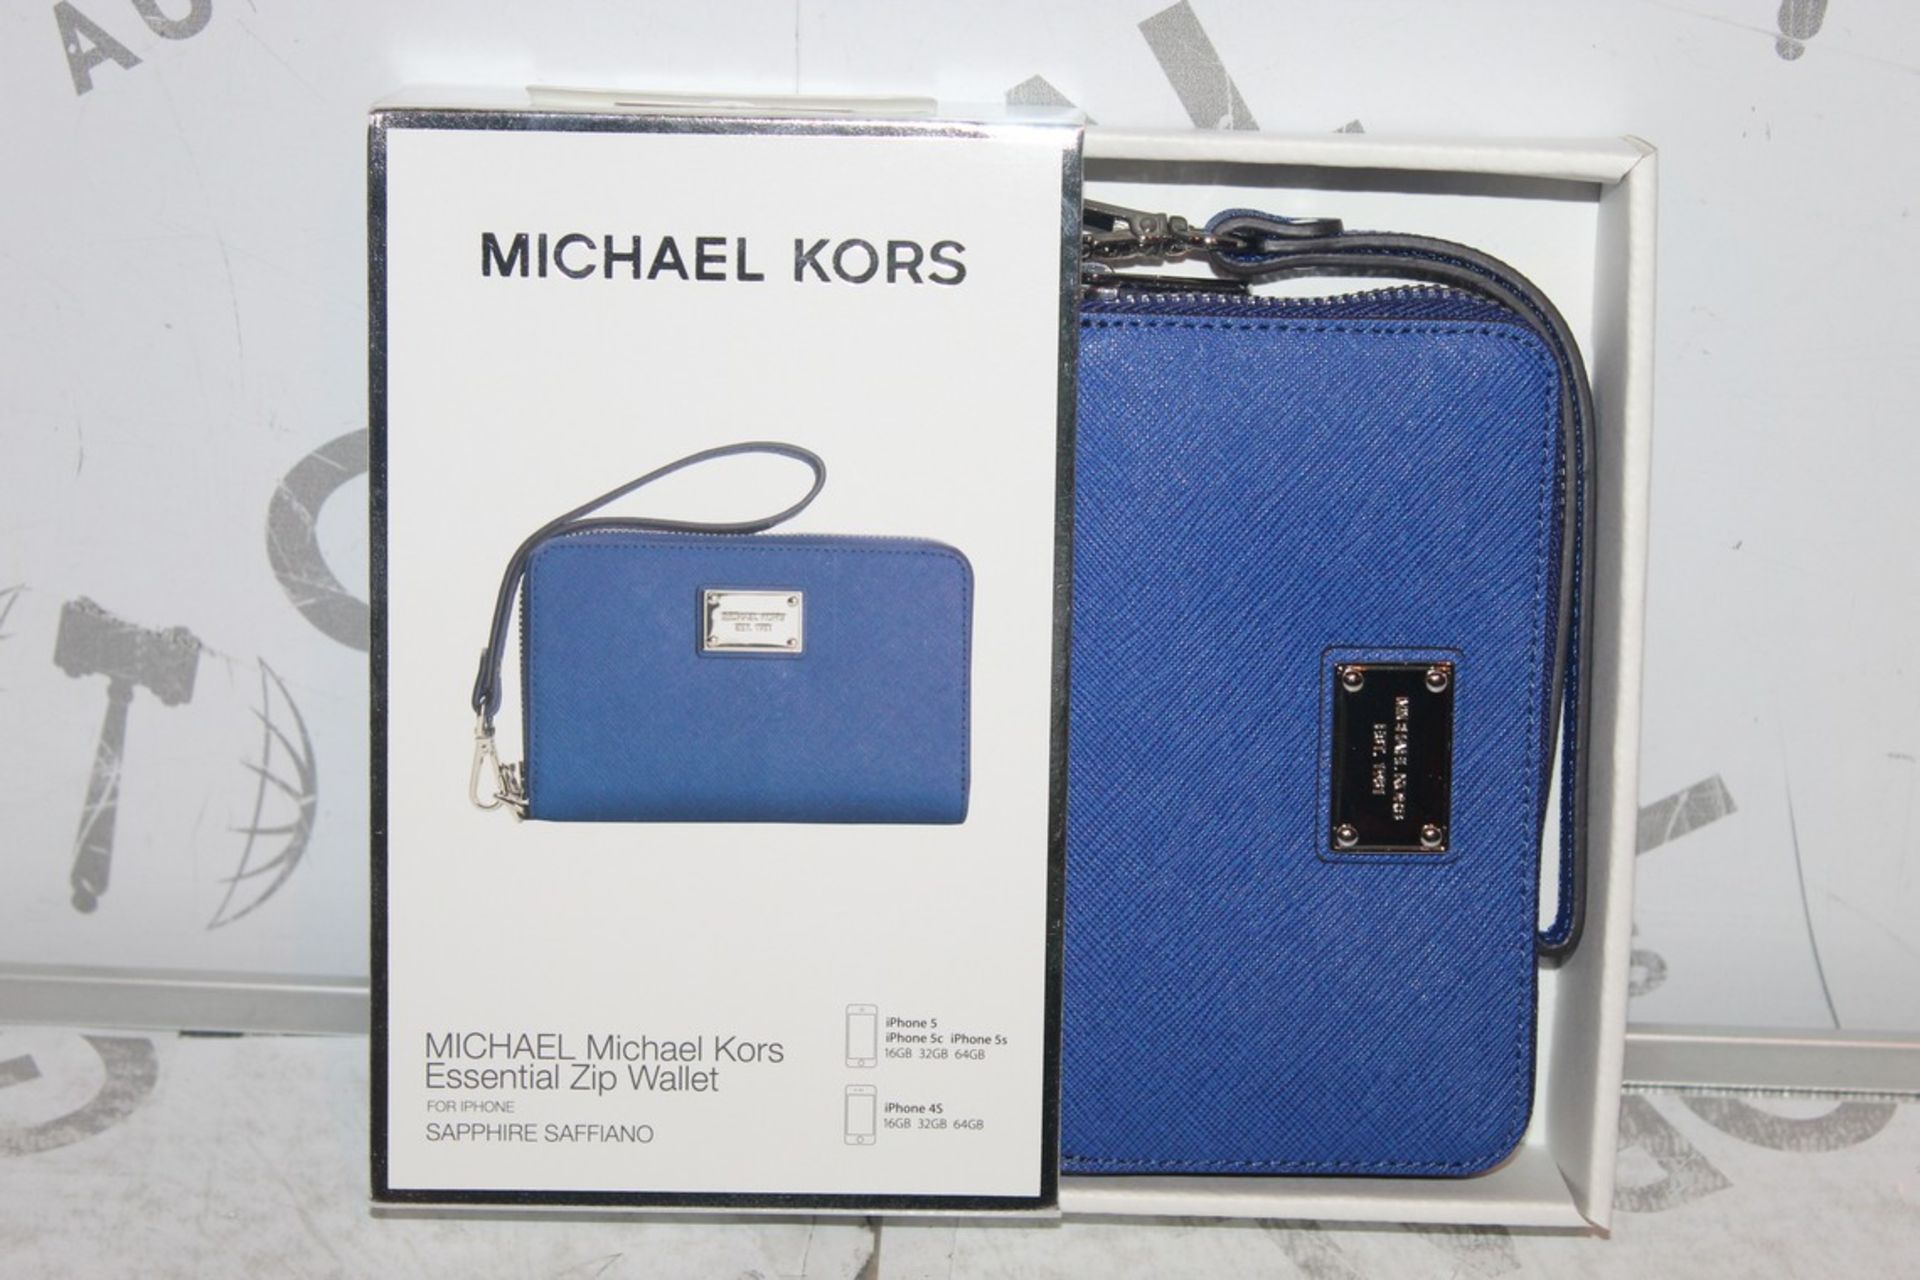 Lot to Contain 2 Boxed Michael Kors Sapphire Sapphino Blue Essential Zip Wallets Combined RRP £70